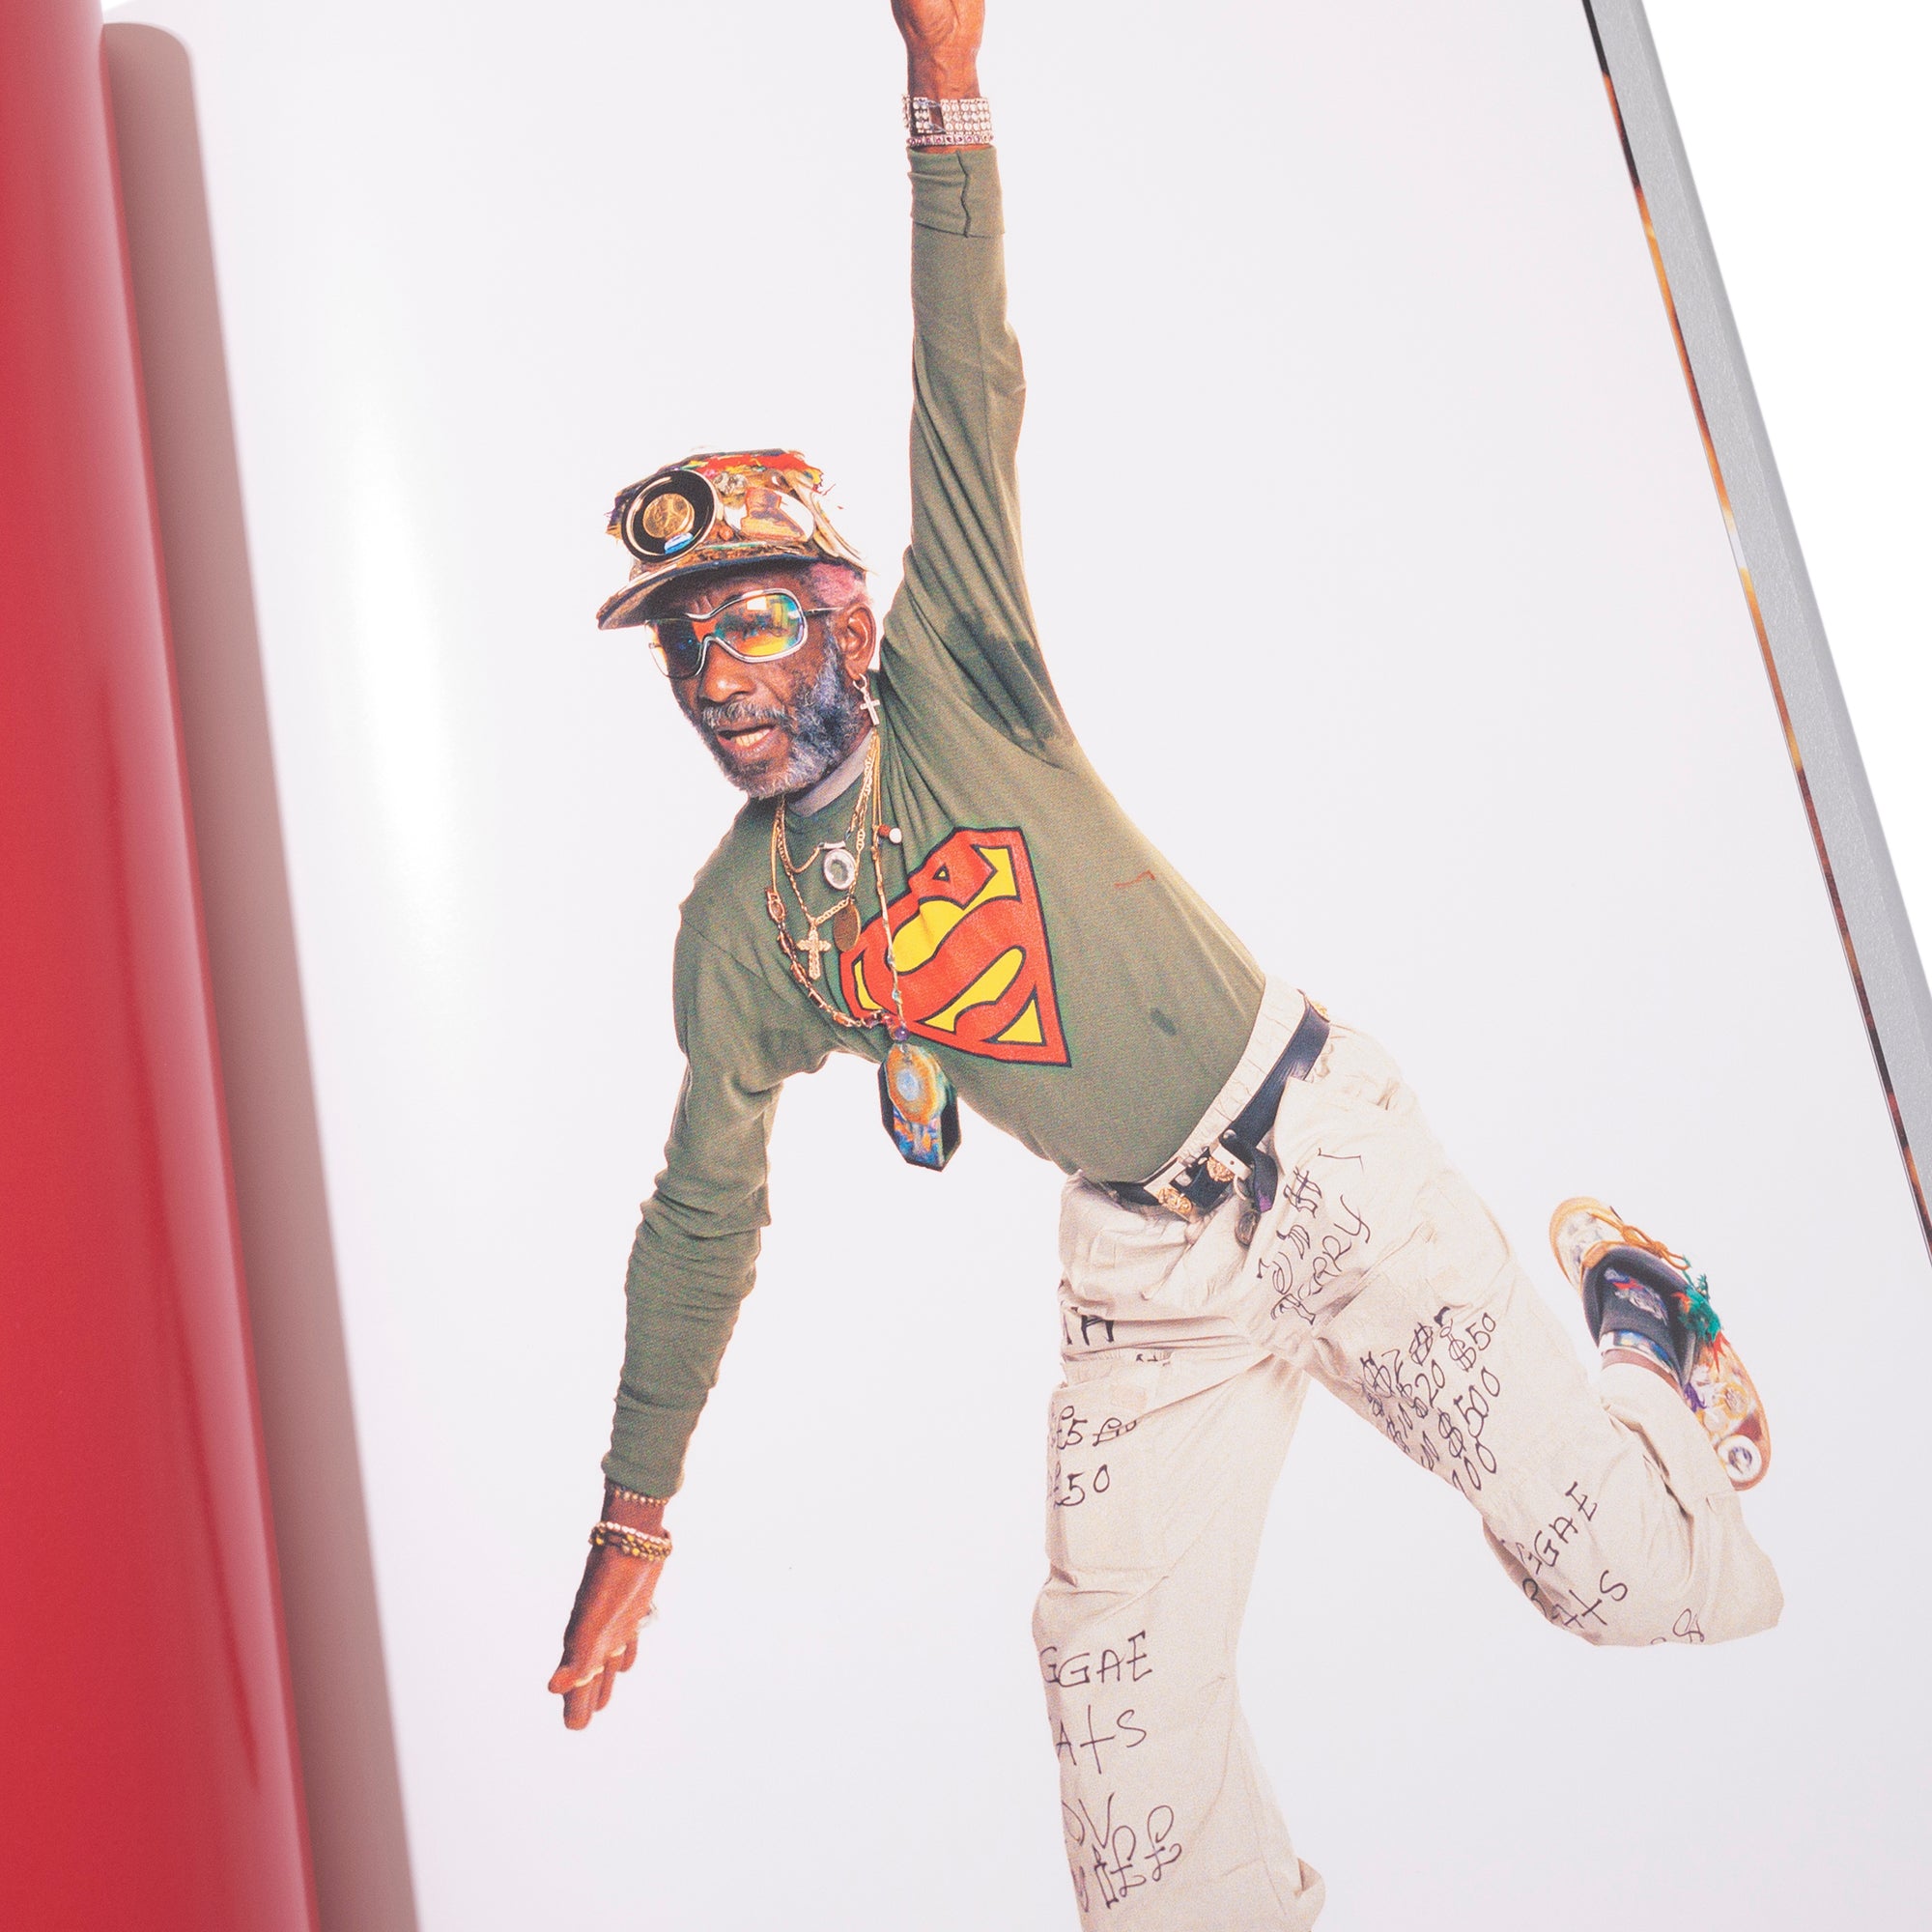 DENNIS MORRIS "SUPER PERRY - THE ICONIC IMAGES OF LEE 'SCRATCH' PERRY"